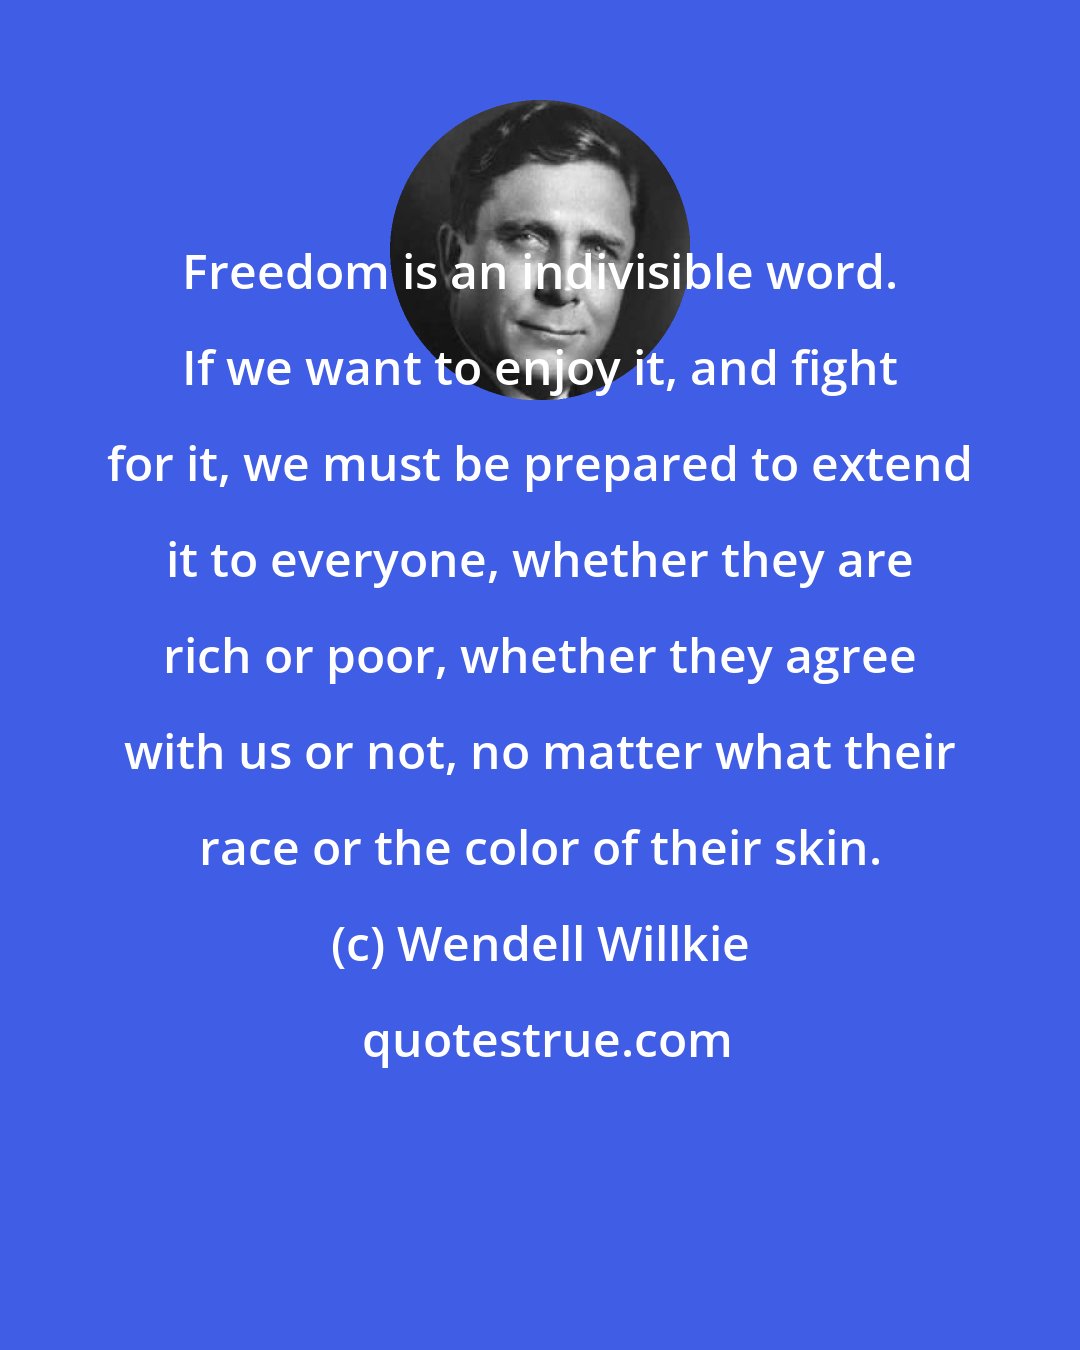 Wendell Willkie: Freedom is an indivisible word. If we want to enjoy it, and fight for it, we must be prepared to extend it to everyone, whether they are rich or poor, whether they agree with us or not, no matter what their race or the color of their skin.